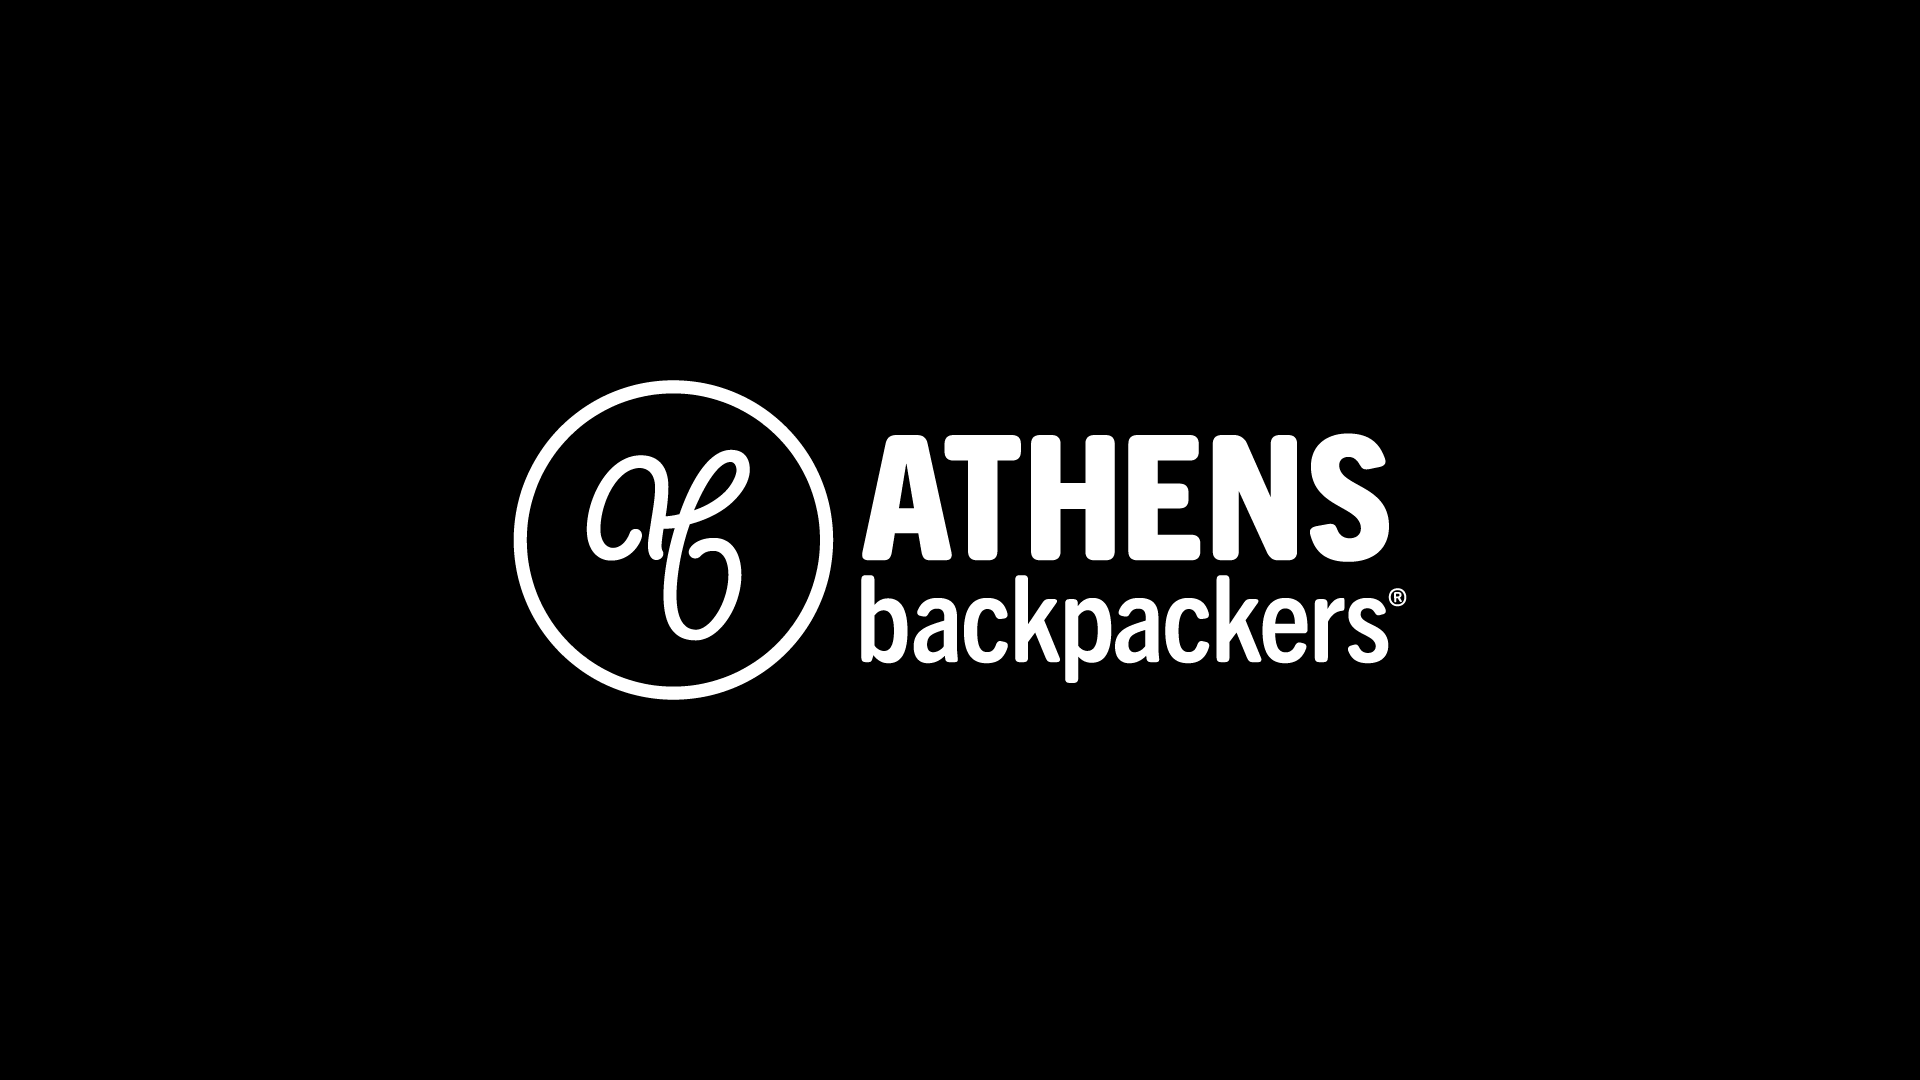 Athens backpackers 2022 logotype